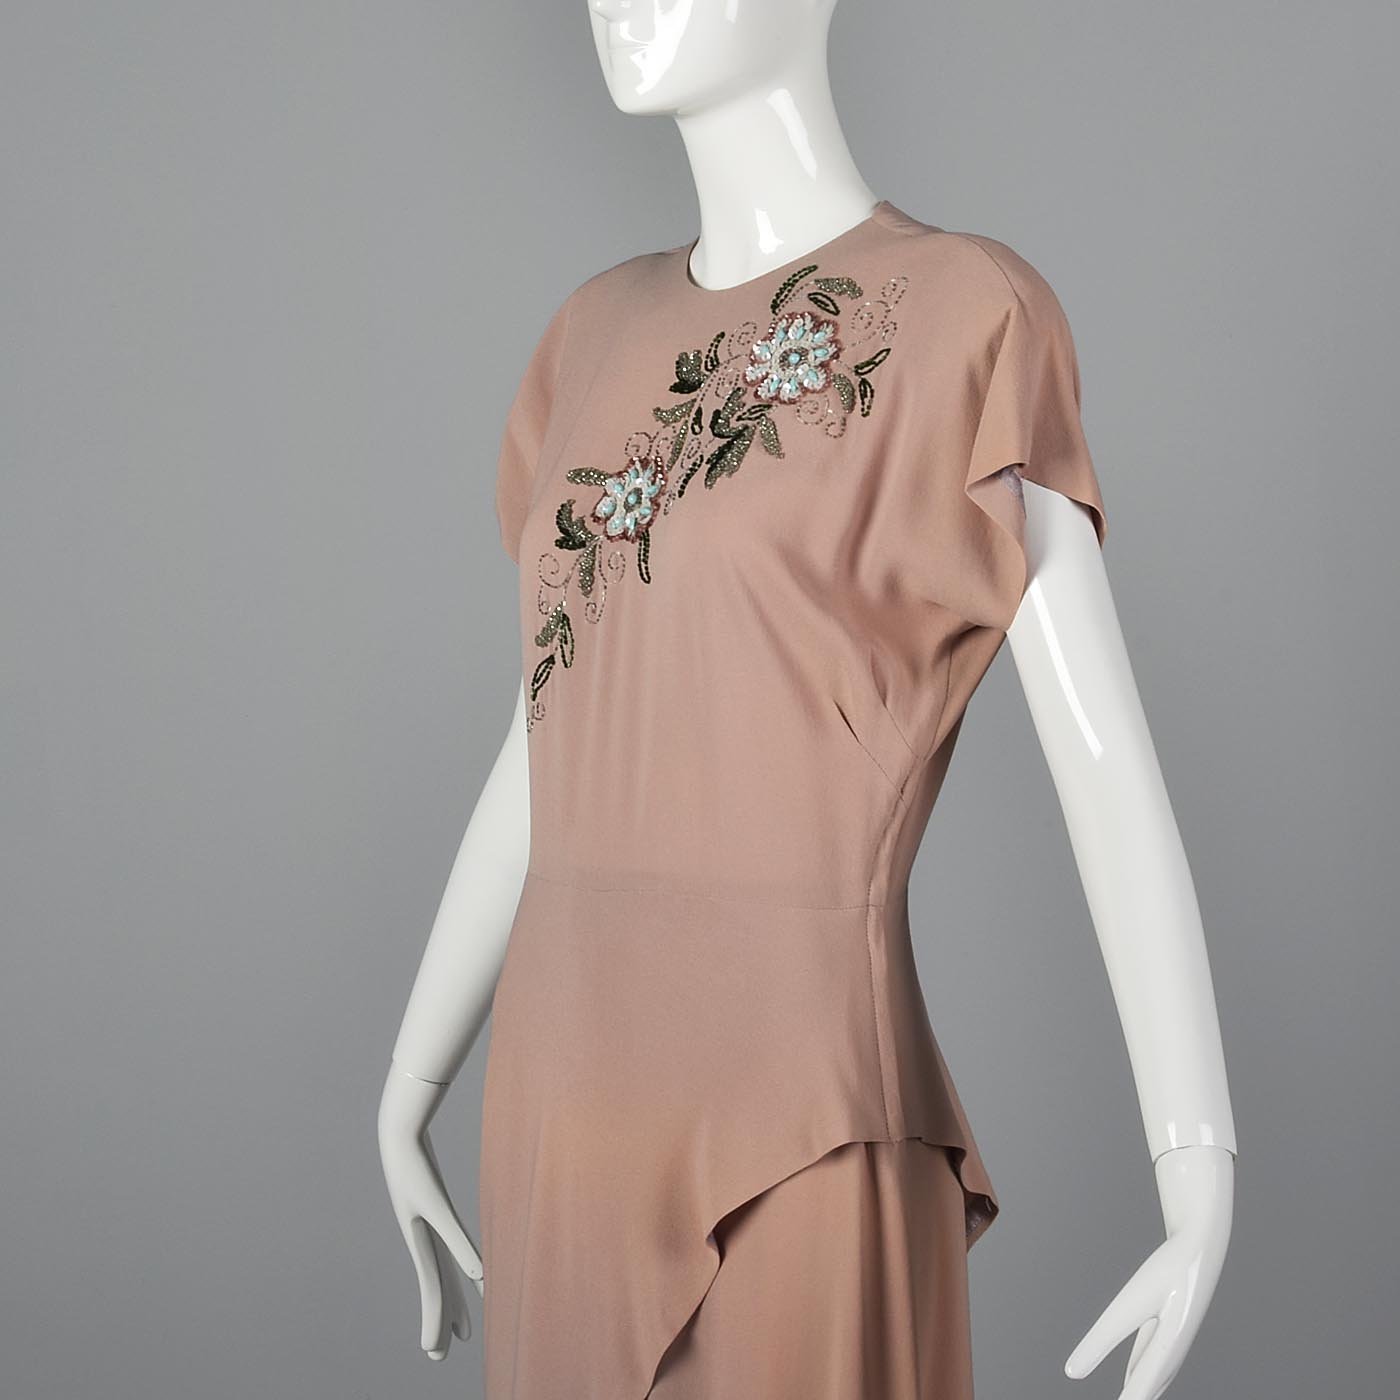 1940s Peach Crepe Gown with Floral Beaded Bodice